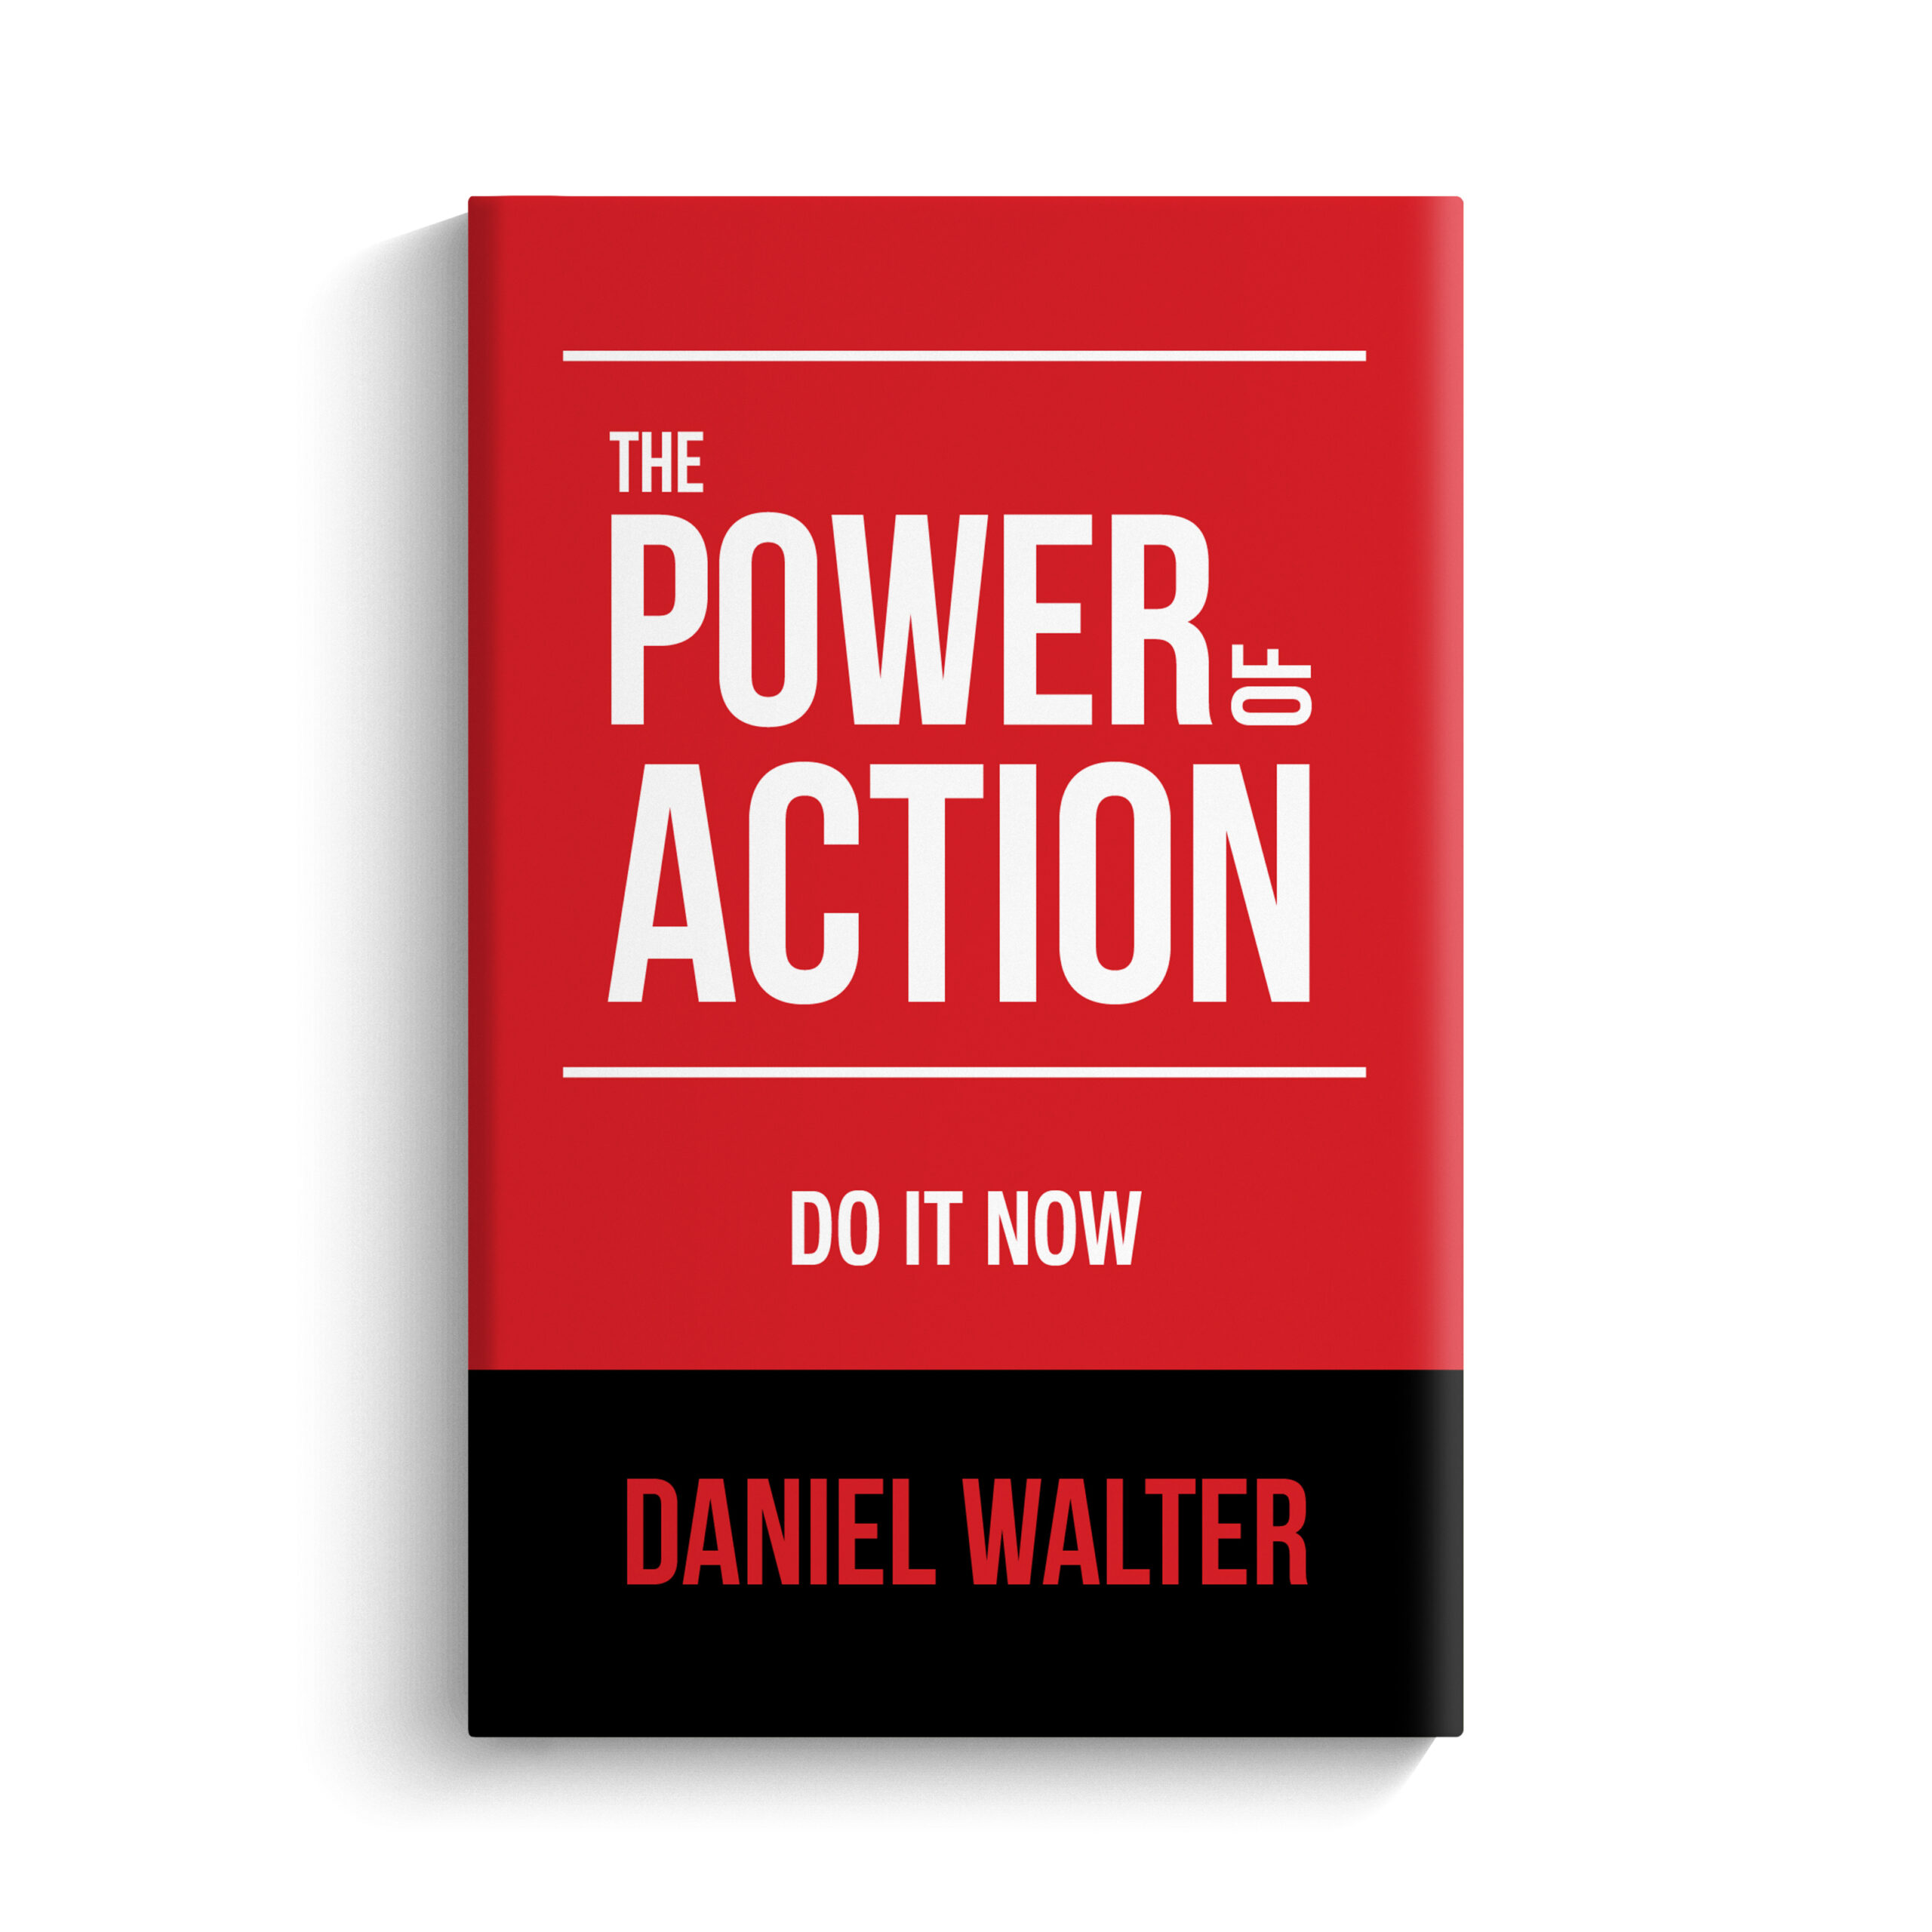 The Power of Action by Daniel Walter